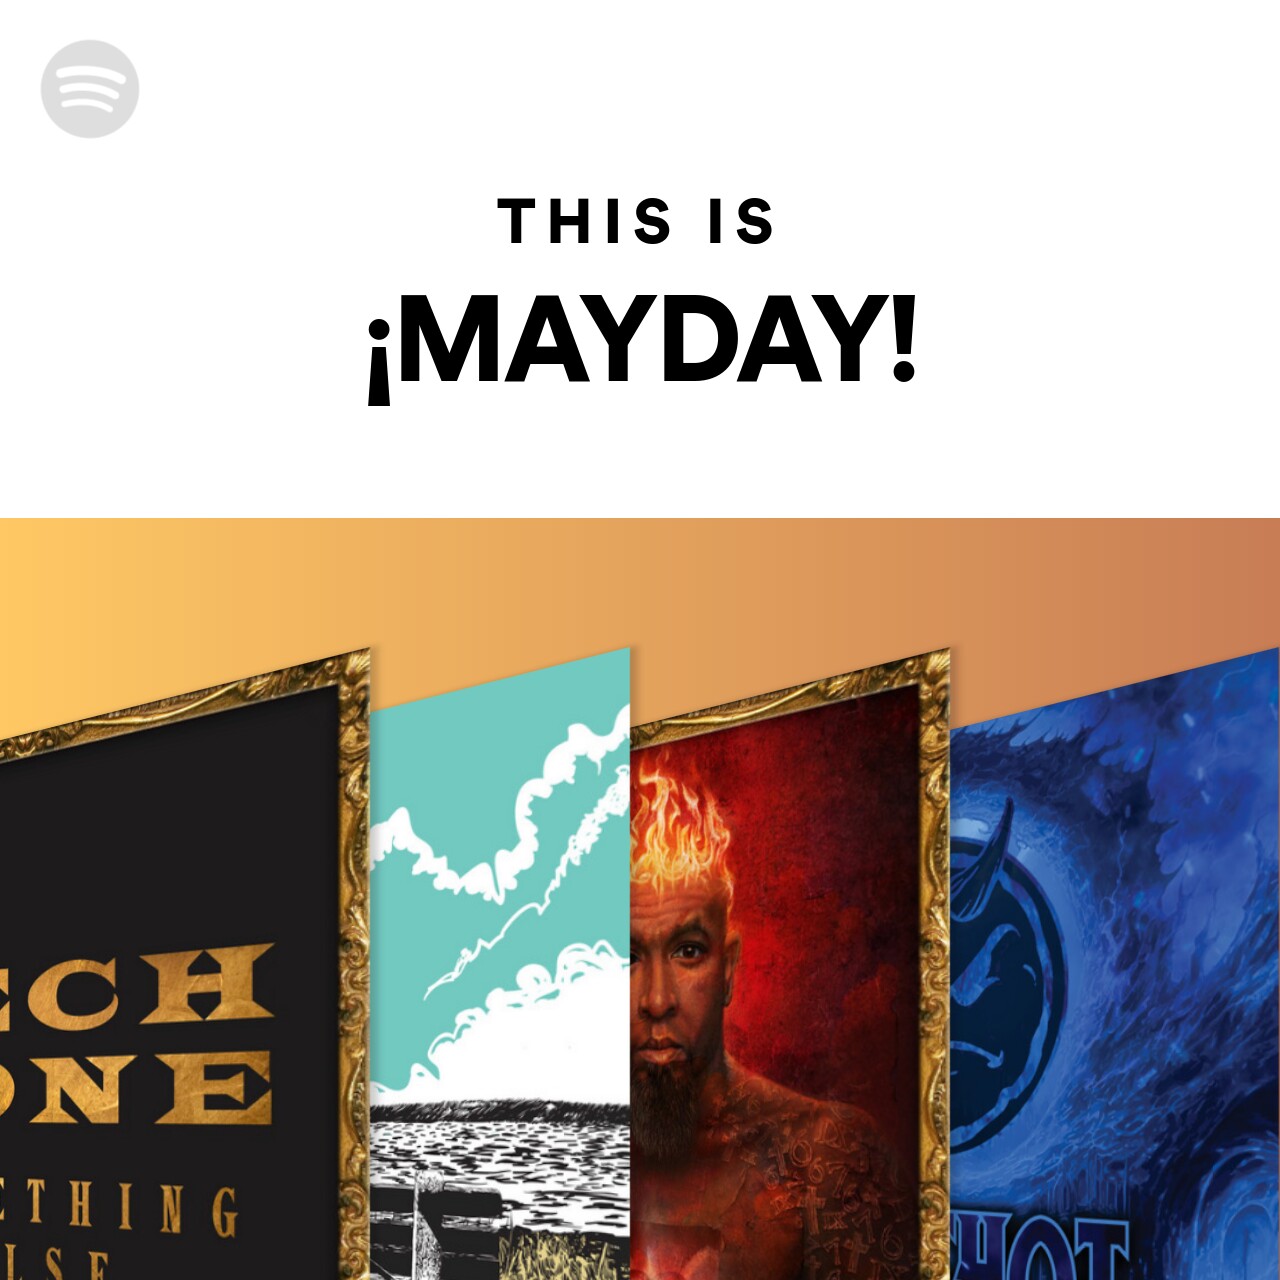 This Is ¡MAYDAY!